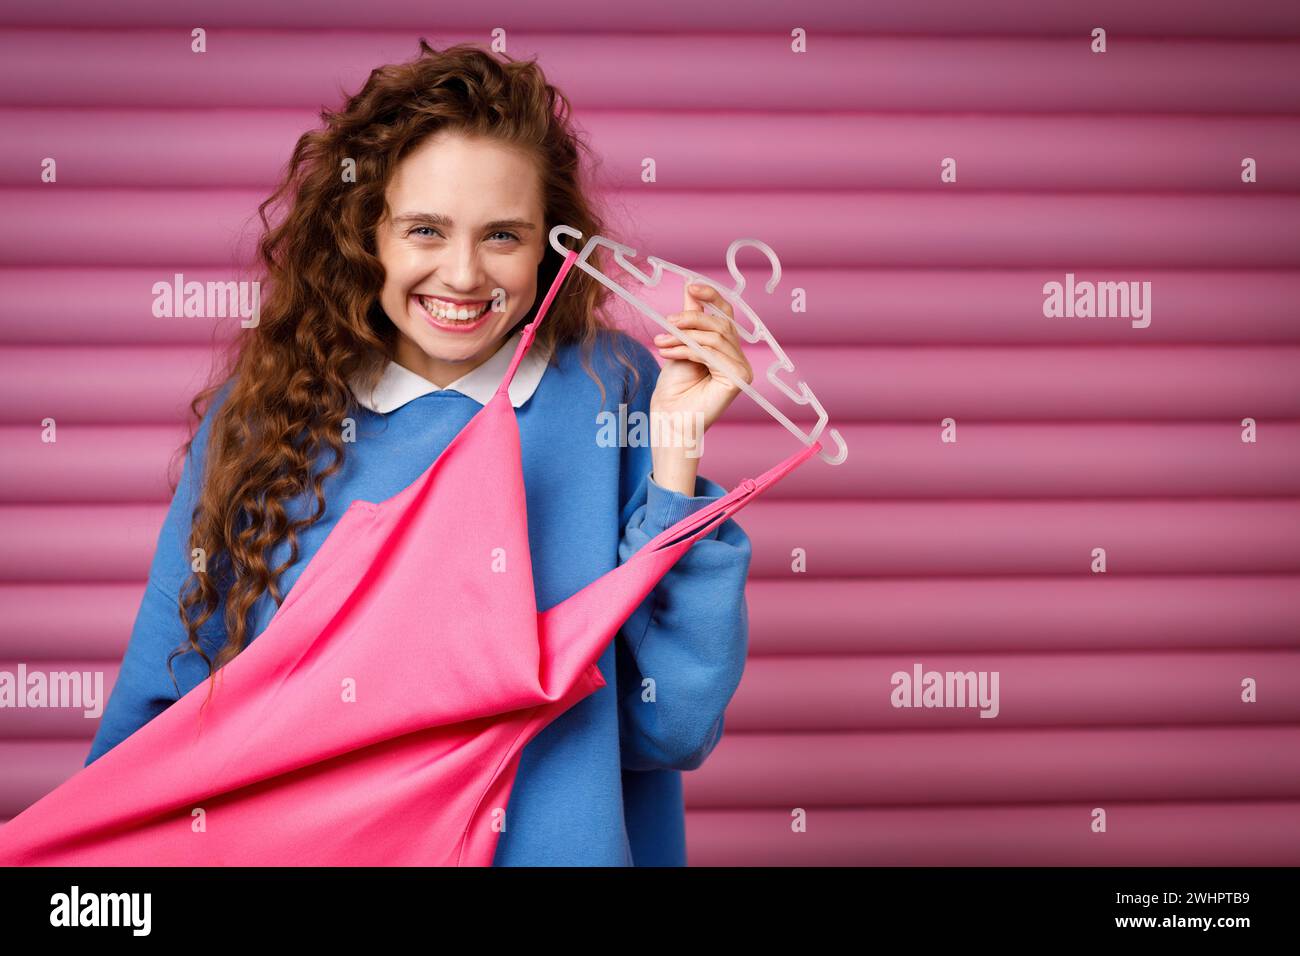 Young woman choosing clothes at fitting room. Shopping concept. Stock Photo